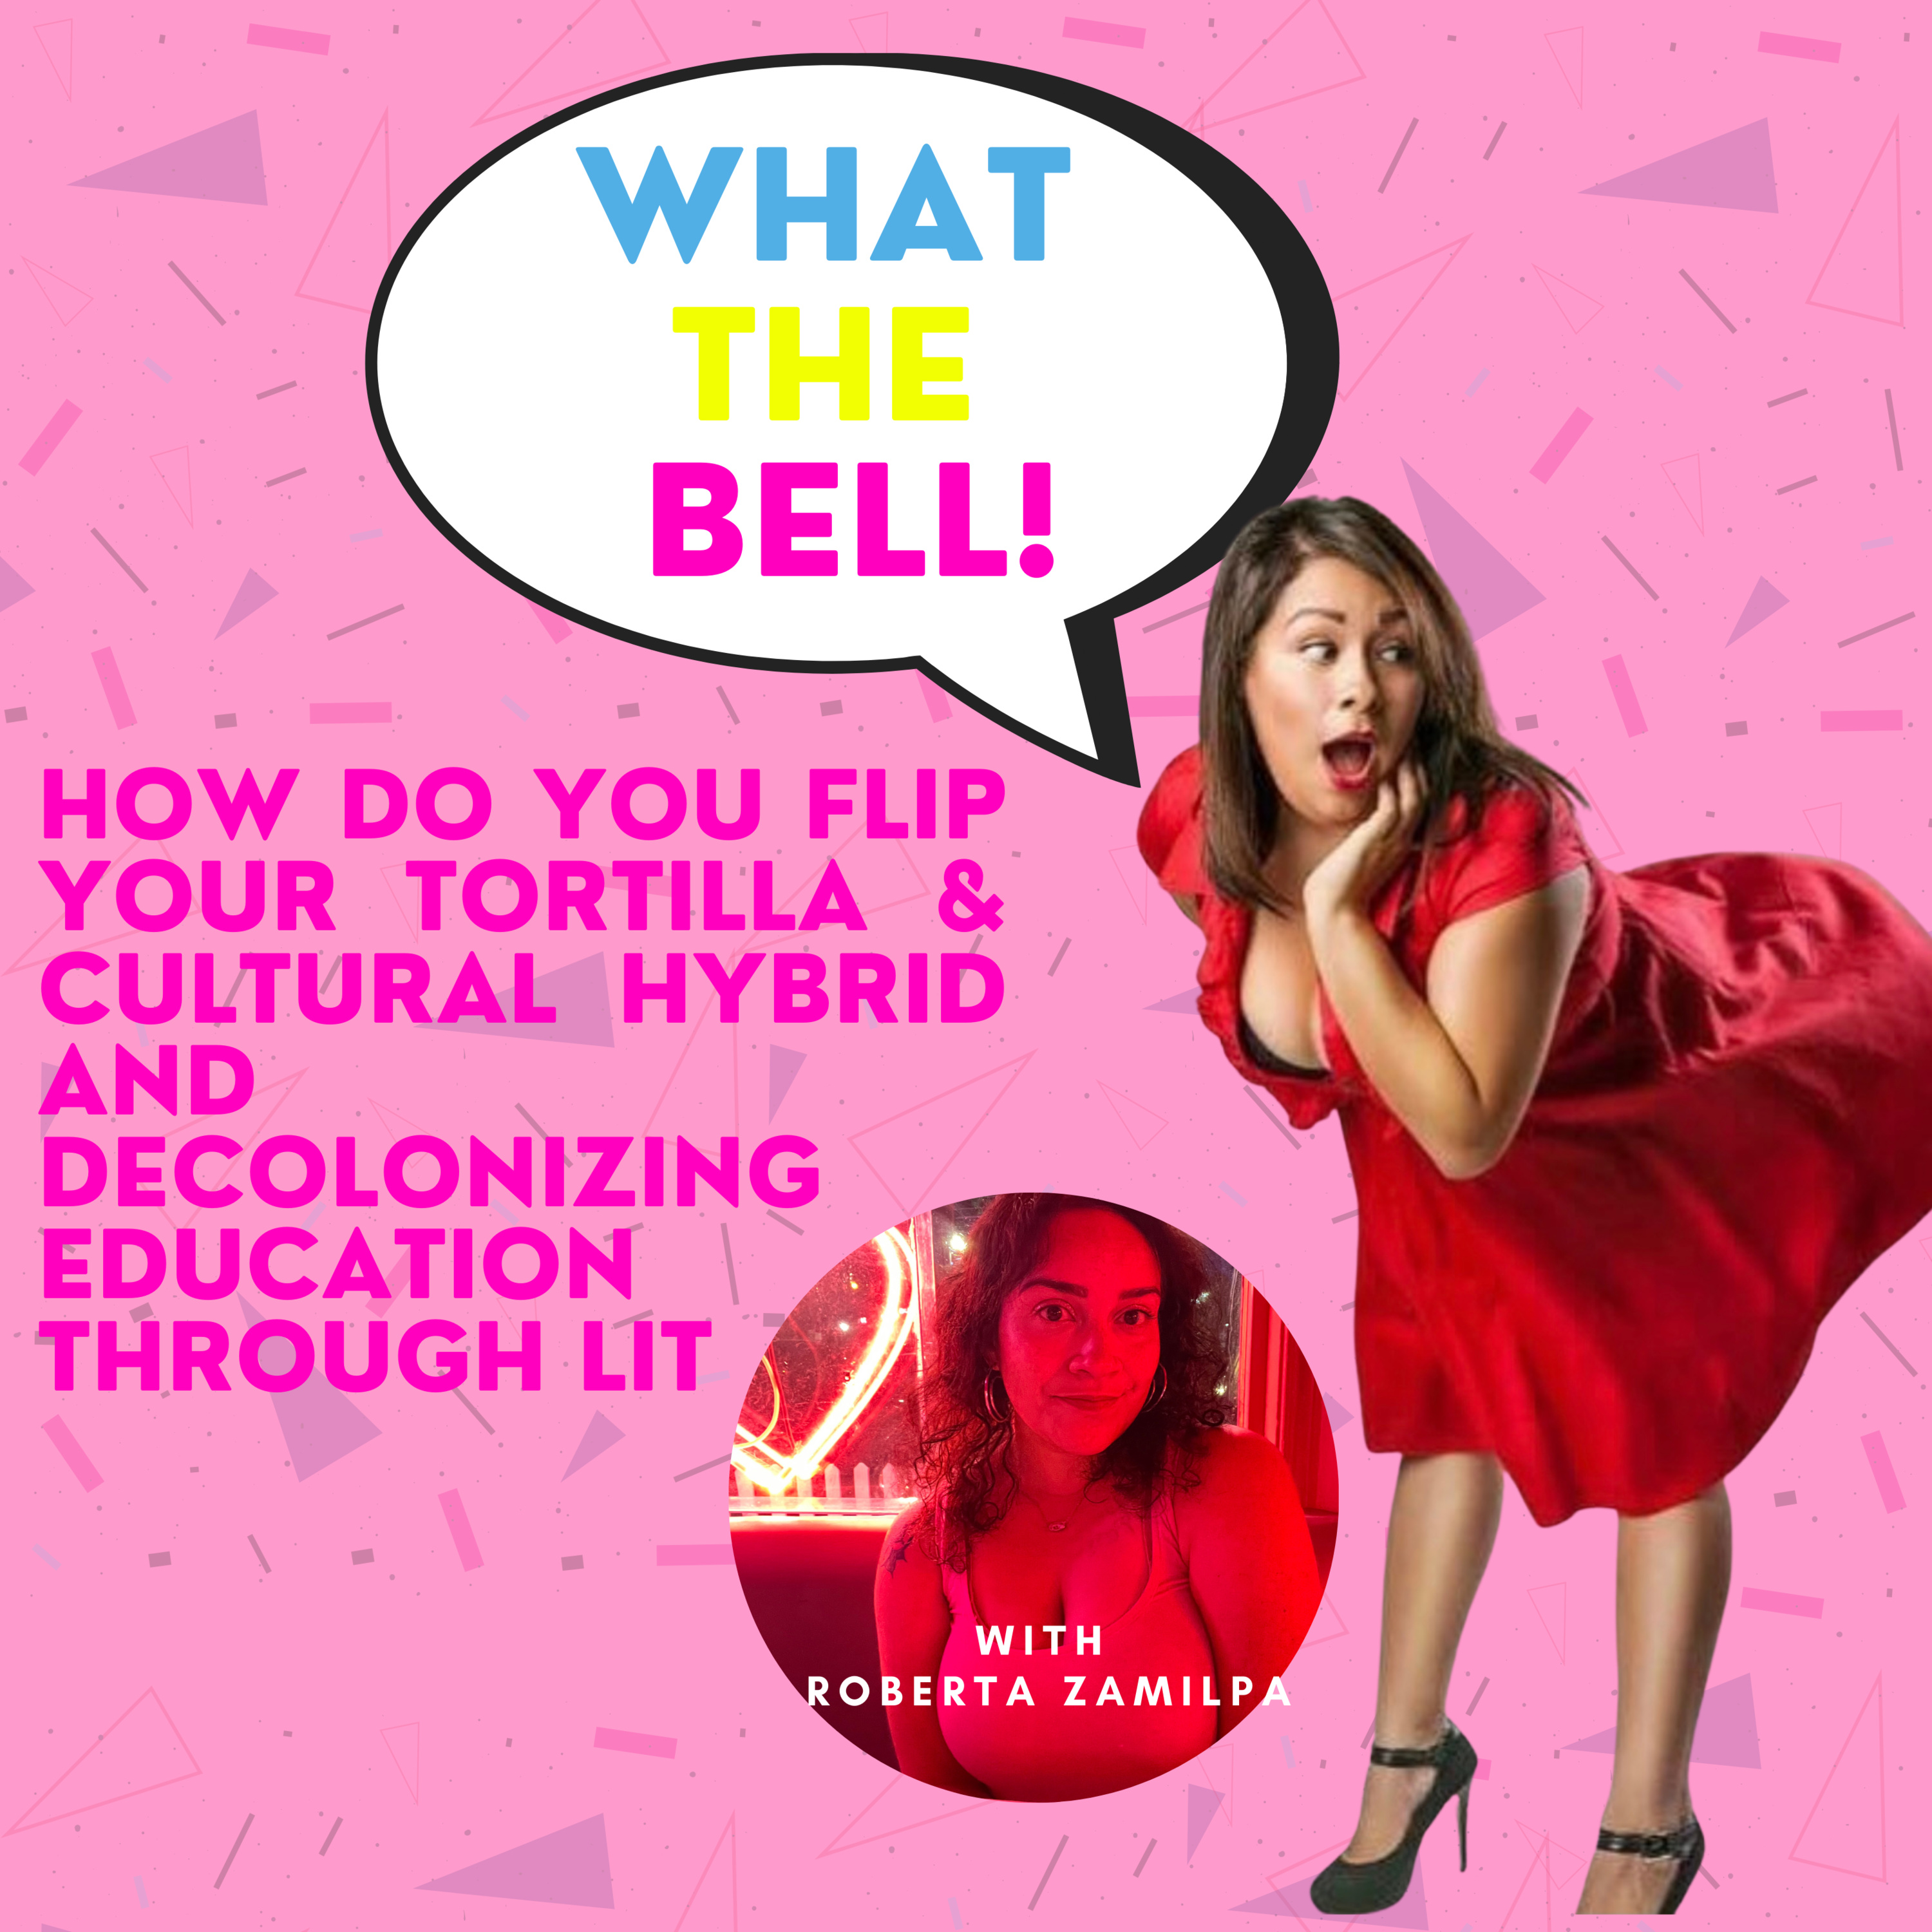 How Do You Flip Your Tortilla, Cultural Hybrid and Decolonizing Education Through Literature & Harry Styles Drama